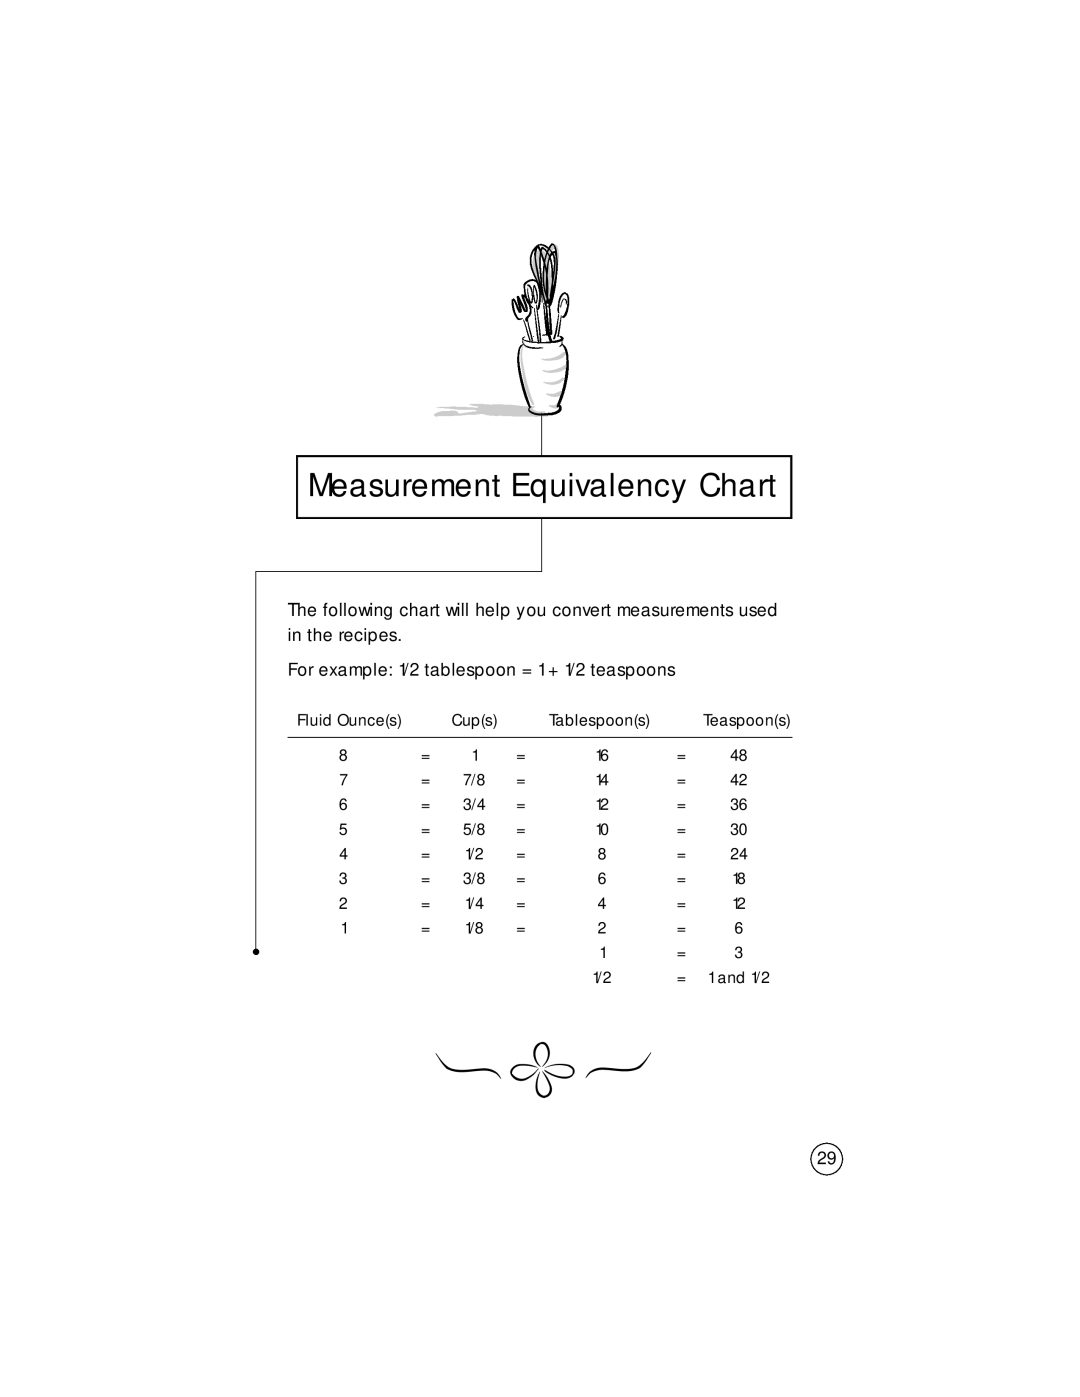 Oster Bread Maker user manual Measurement Equivalency Chart, For example 1/2 tablespoon = 1 + 1/2 teaspoons 